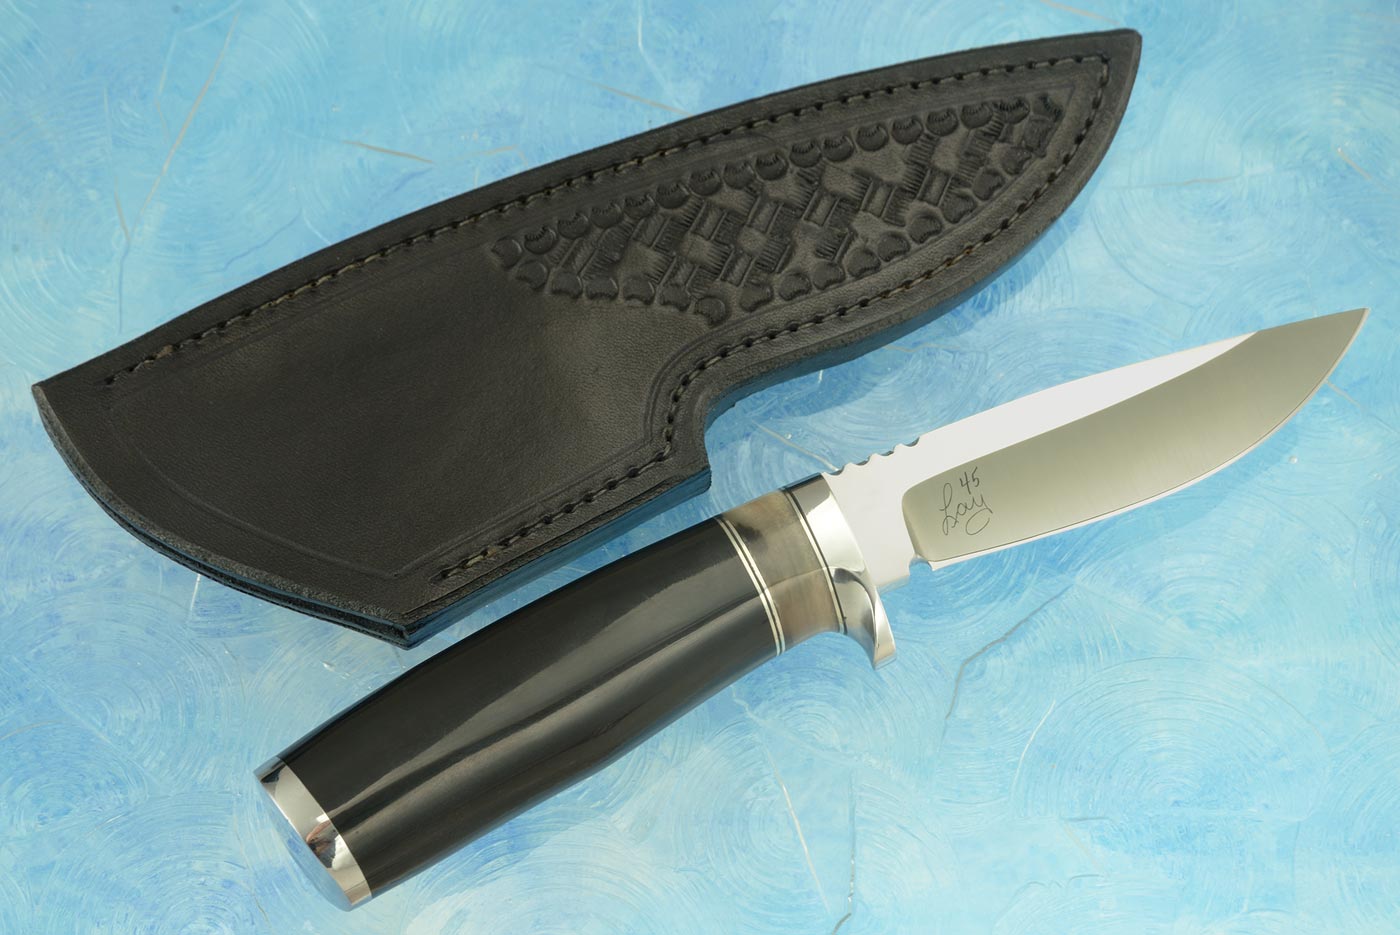 Personal with Buffalo Horn and Sheep Horn (45th Anniversary Knife)